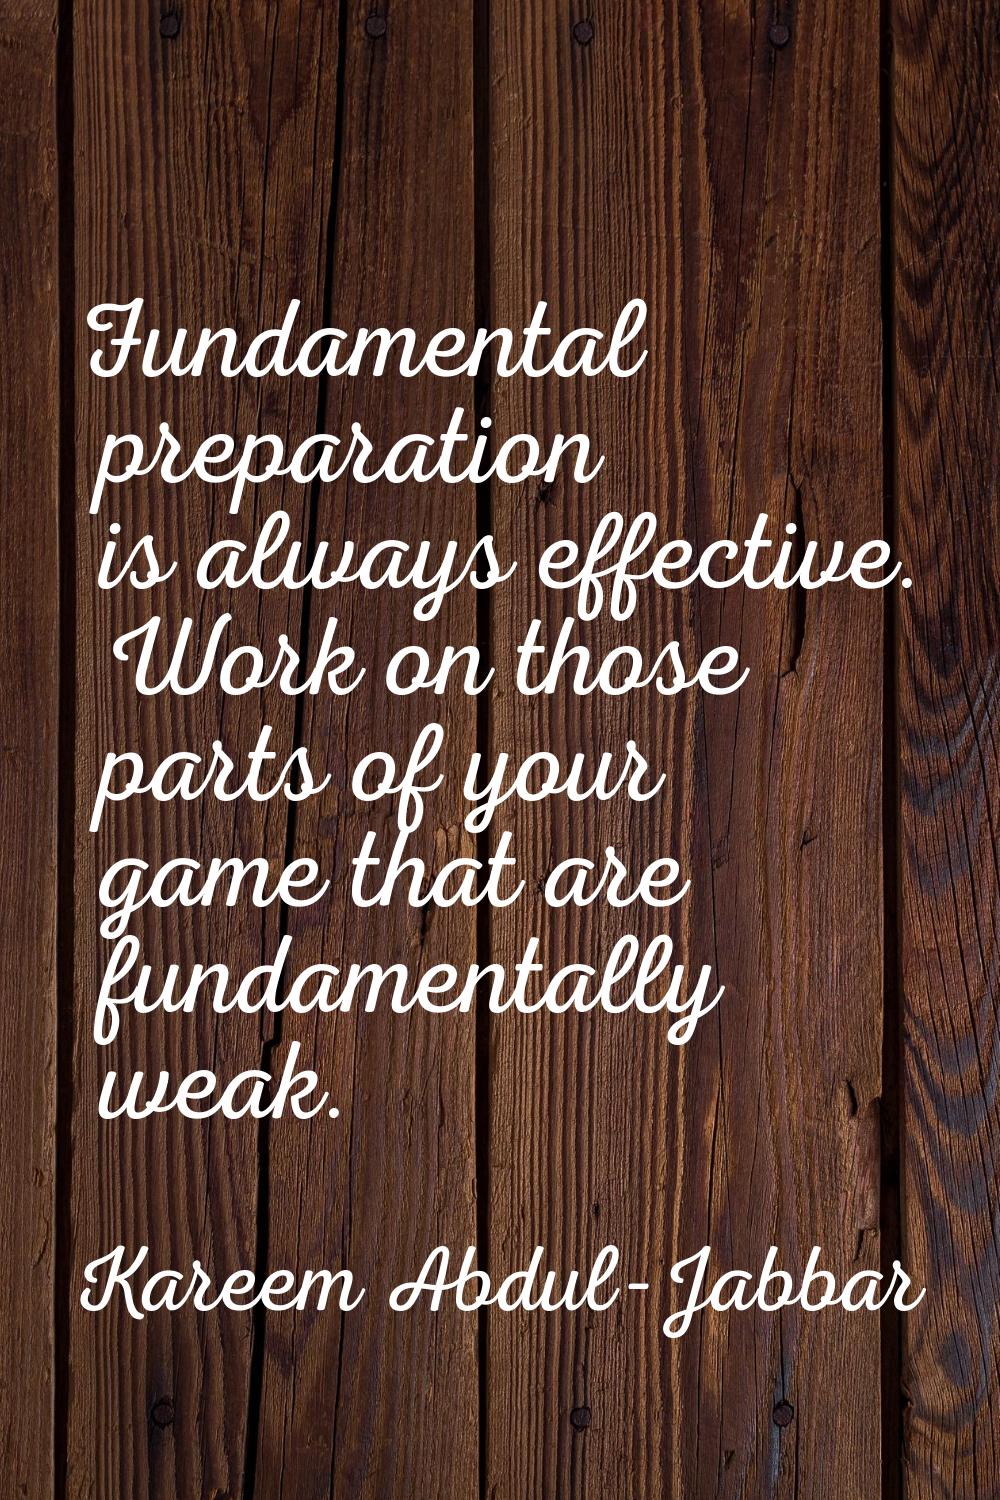 Fundamental preparation is always effective. Work on those parts of your game that are fundamentall